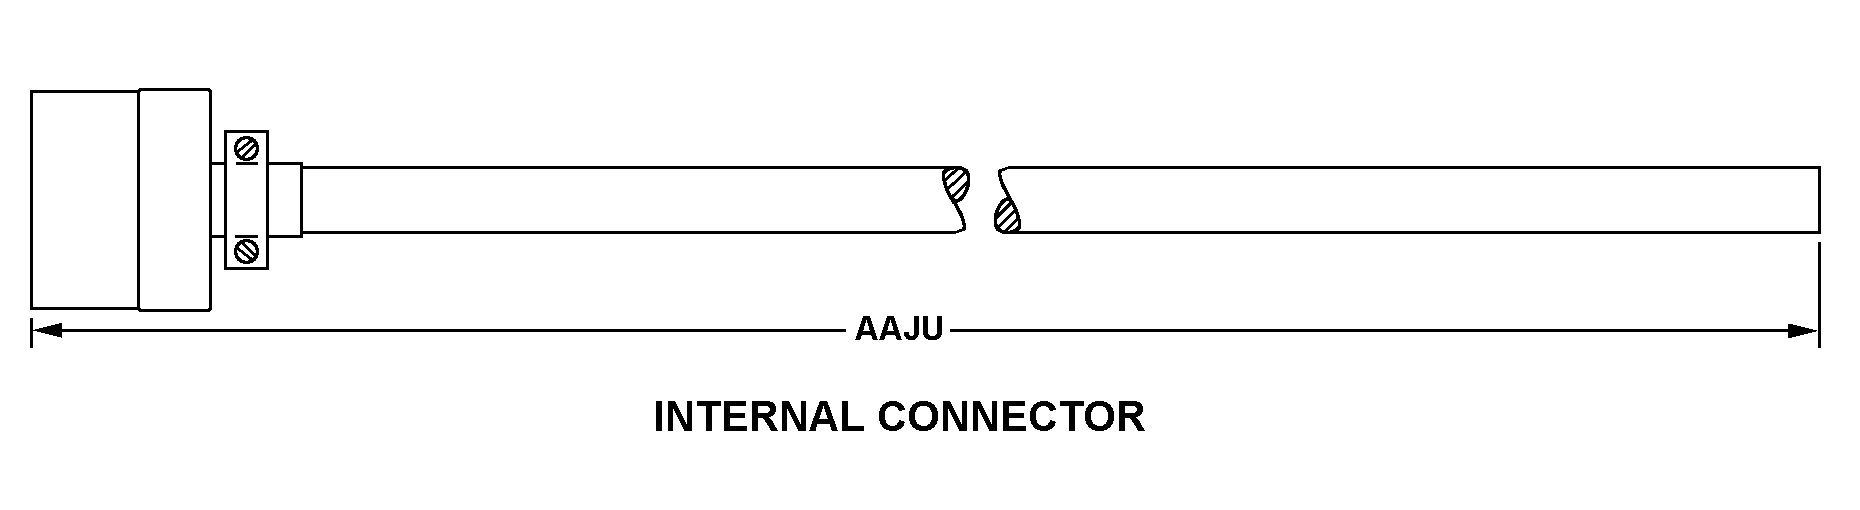 INTERNAL CONNECTOR style nsn 6150-01-259-1377